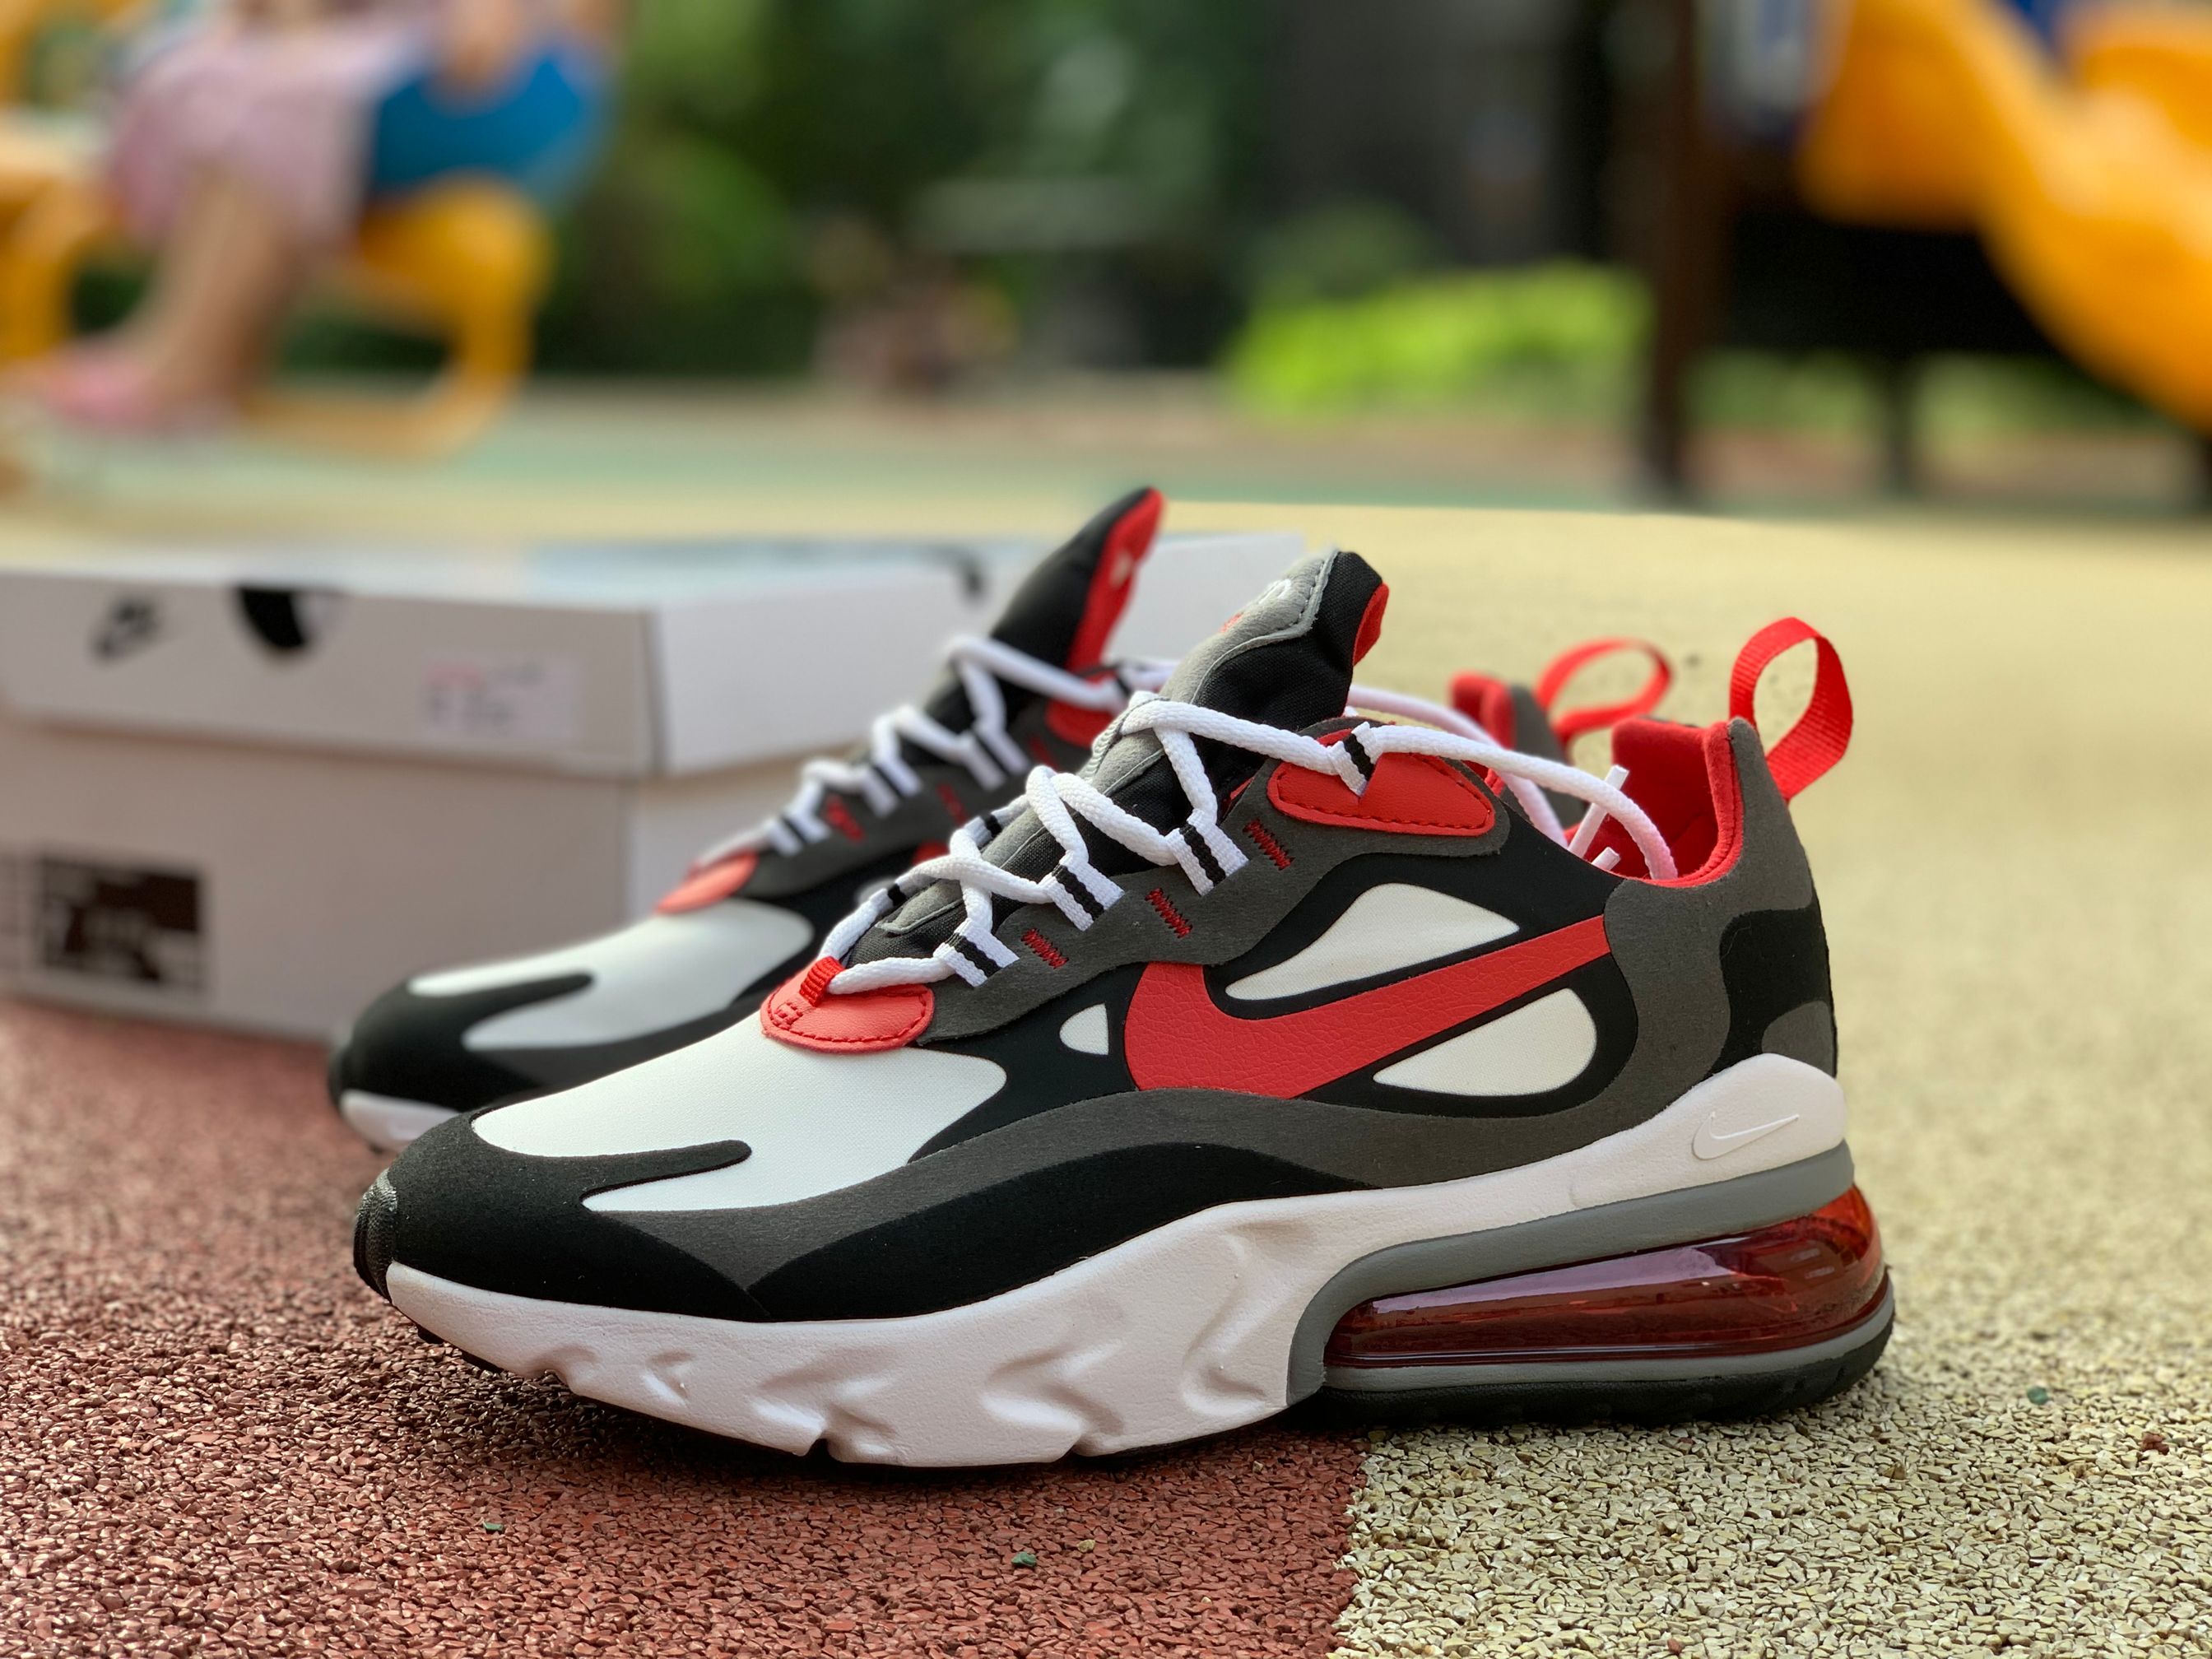 Hot Sell Nike Air Max 270 React "University Red" Cheap For Sale CI3866-002